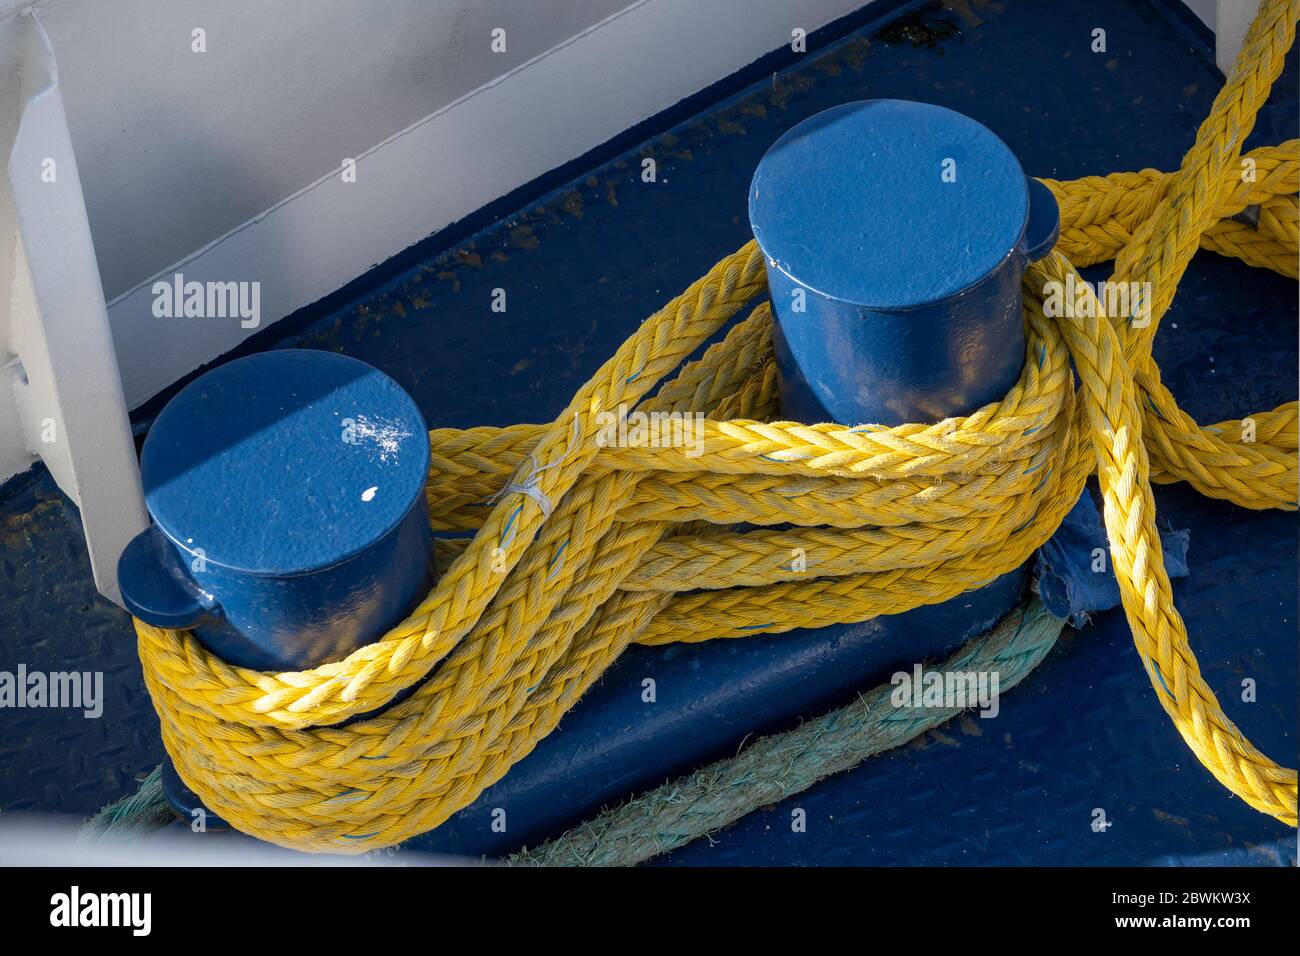 yellow ship rope tied around blue mooring bollards on a metal boat deck Stock Photo